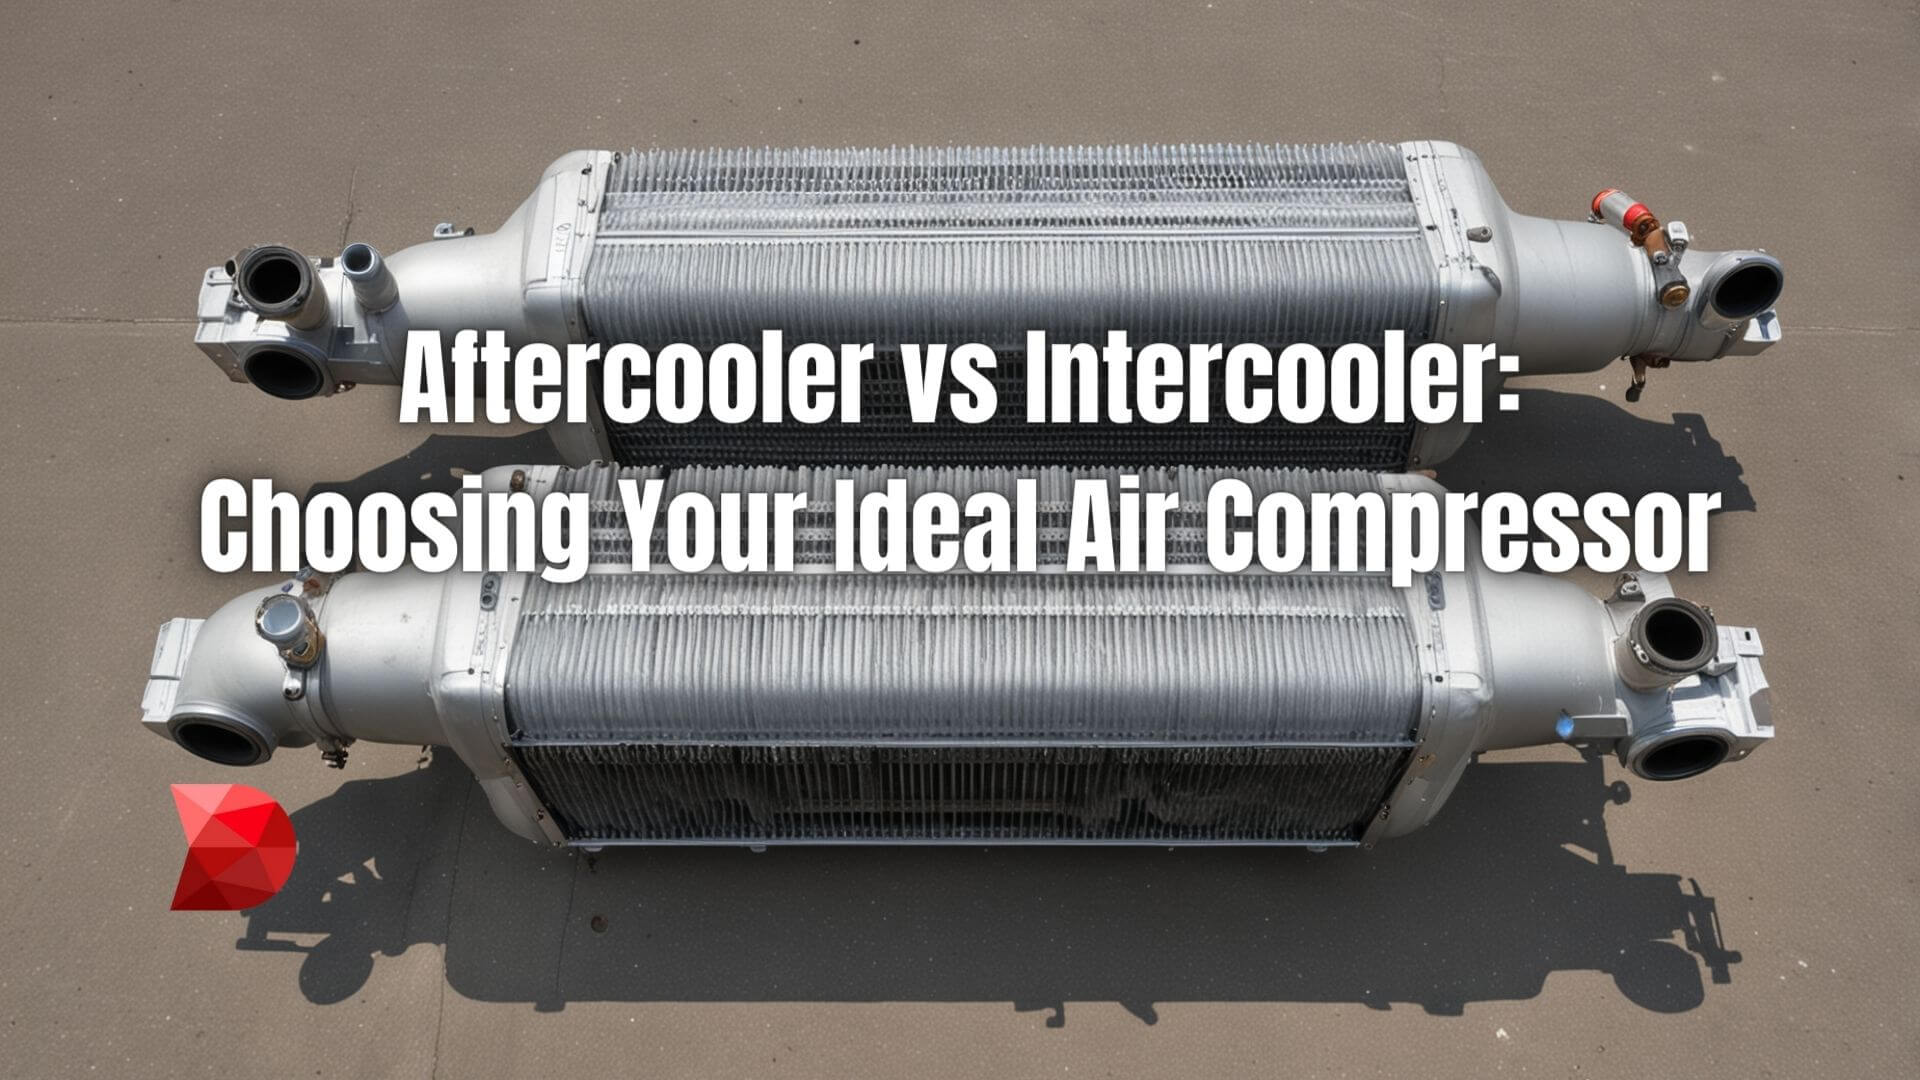 Maximize your air compressor's potential by understanding the difference between an aftercooler vs. intercooler. Click here to learn more!